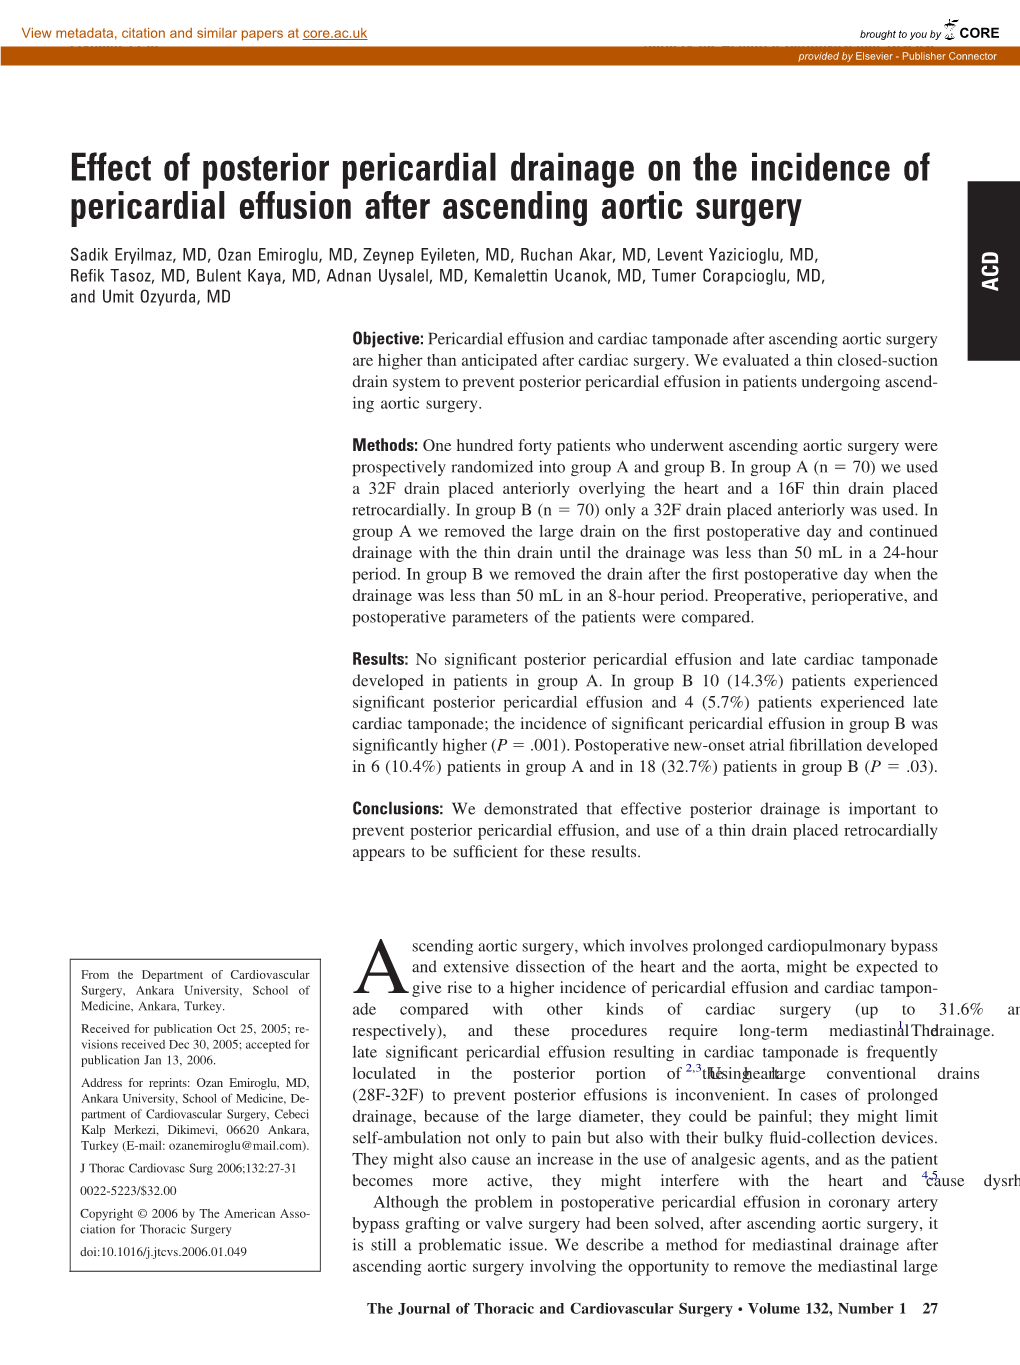 Effect of Posterior Pericardial Drainage on the Incidence of Pericardial Effusion After Ascending Aortic Surgery